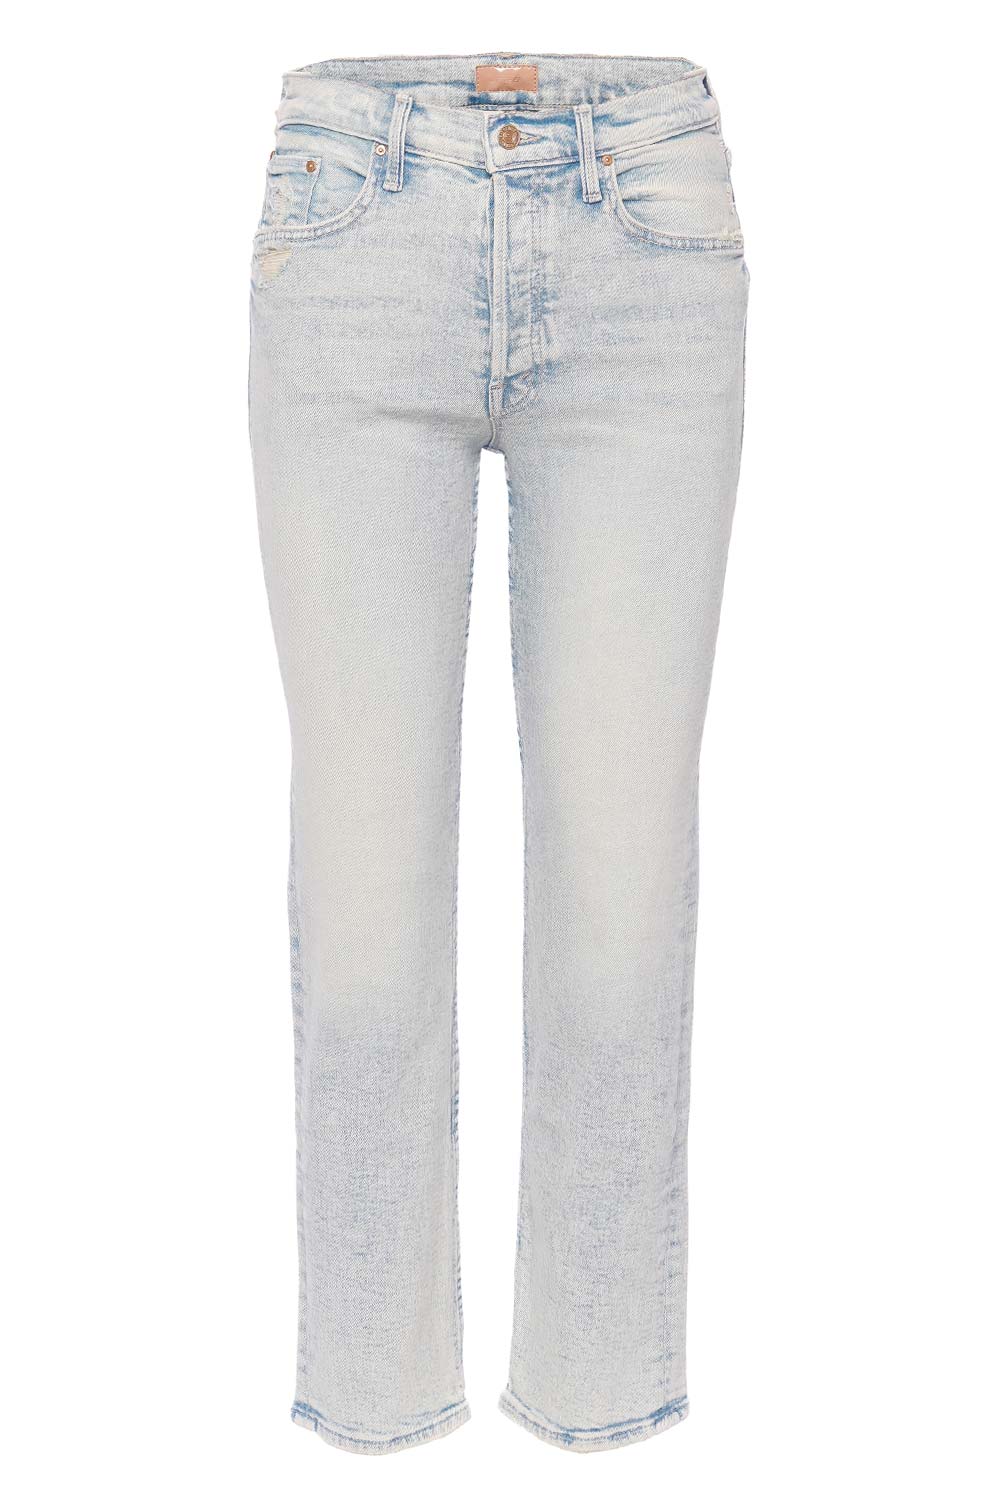 MOTHER Denim The Tomcat Smooth Sailing Ankle Jeans